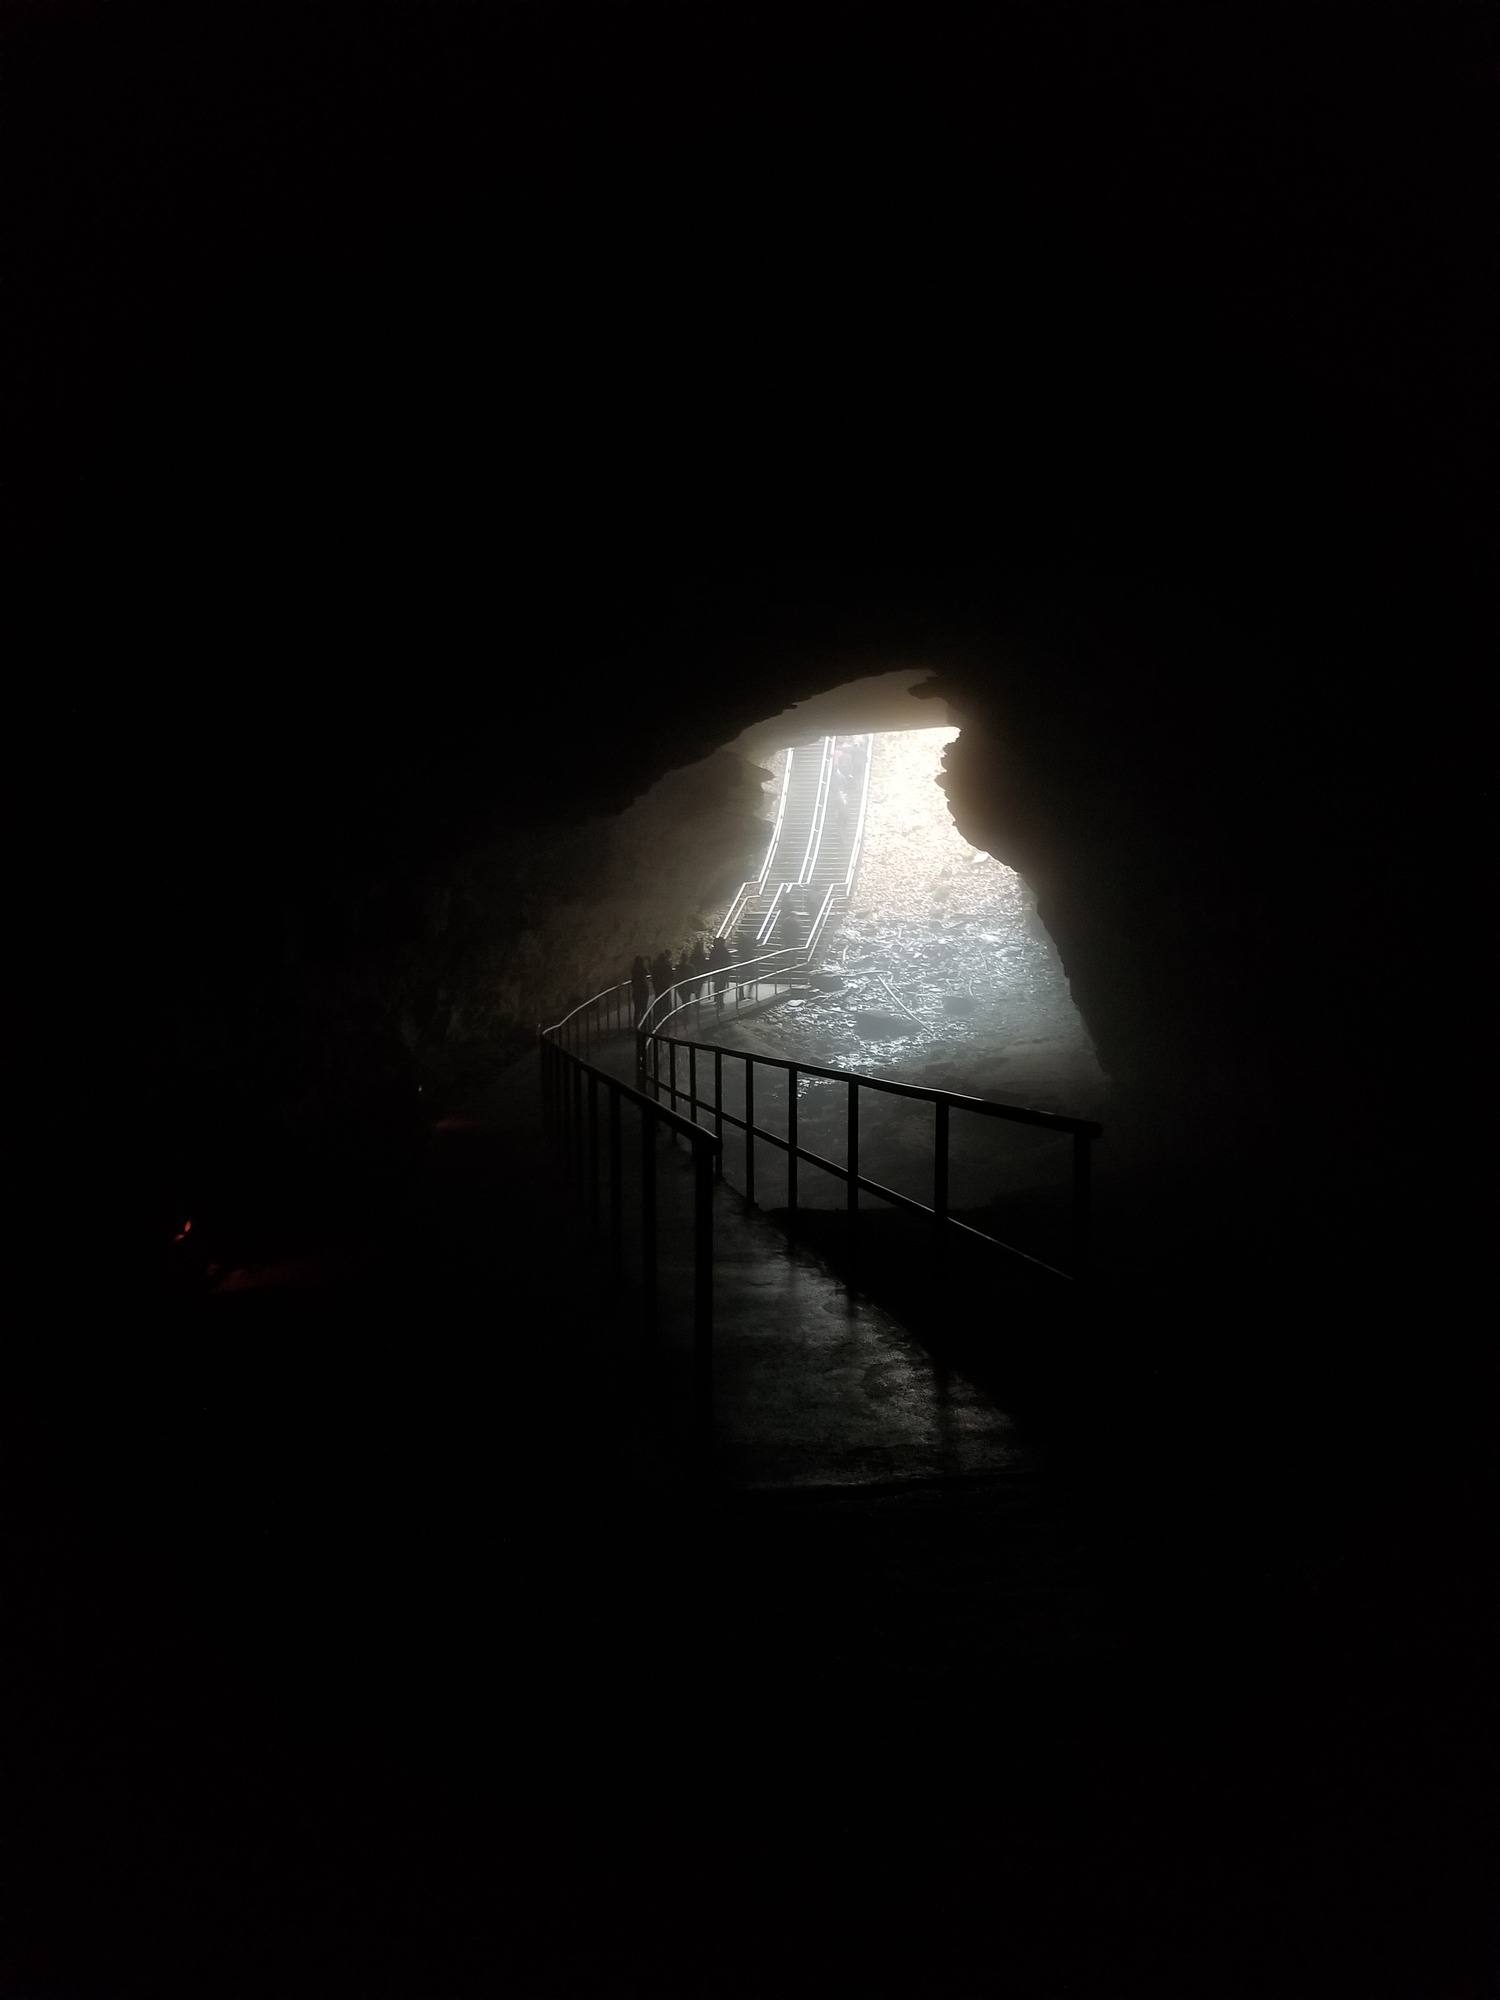 Looking out of the cave to see fog on the surface.